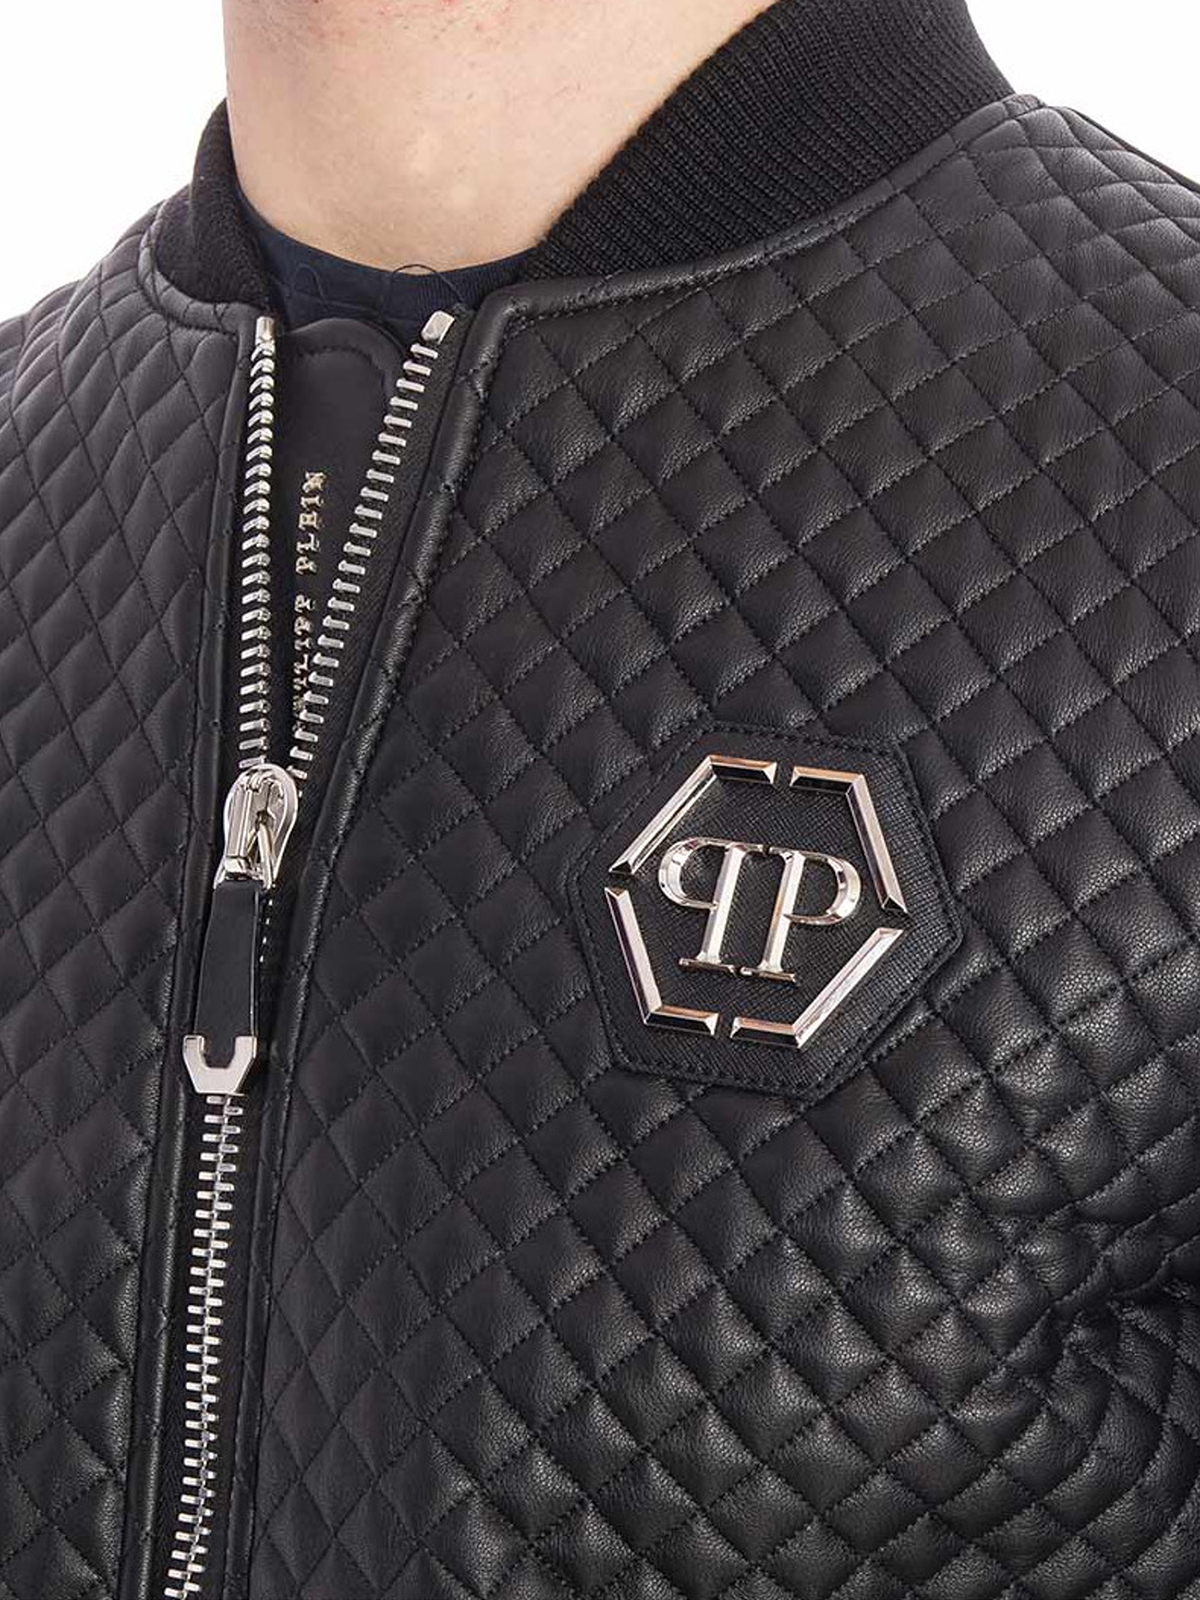 Hirobumi quilted leather bomber 